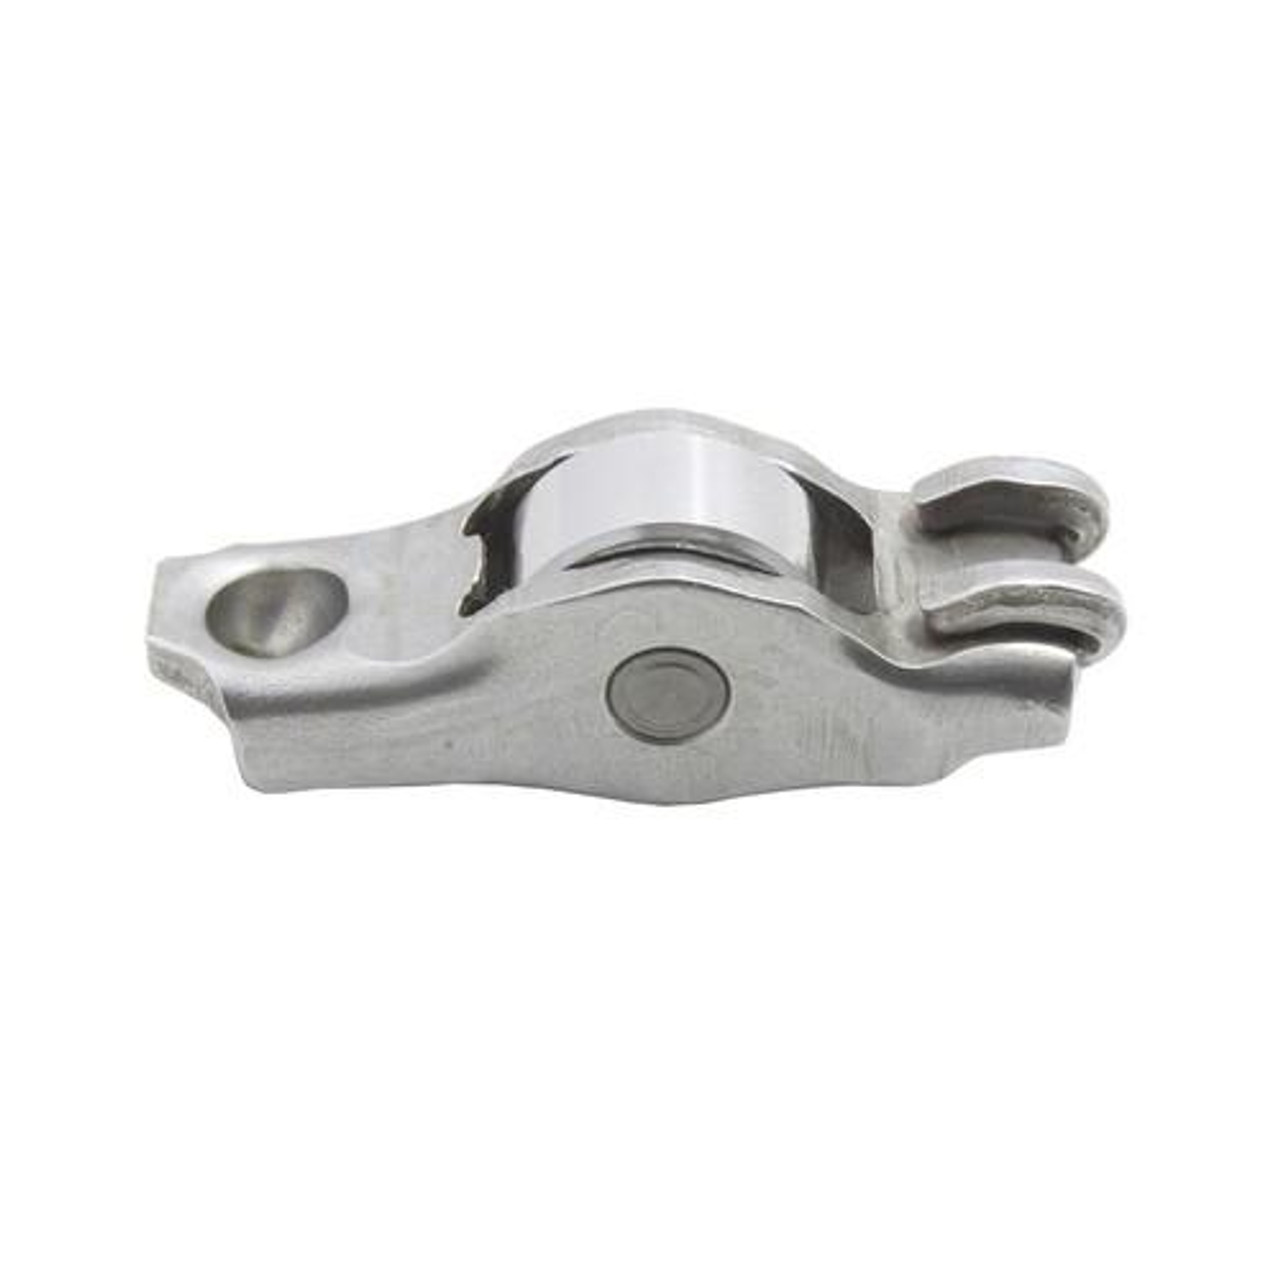 Rocker Arm - 2010 Ford Mustang 5.4L Engine Parts # RA428ZE38